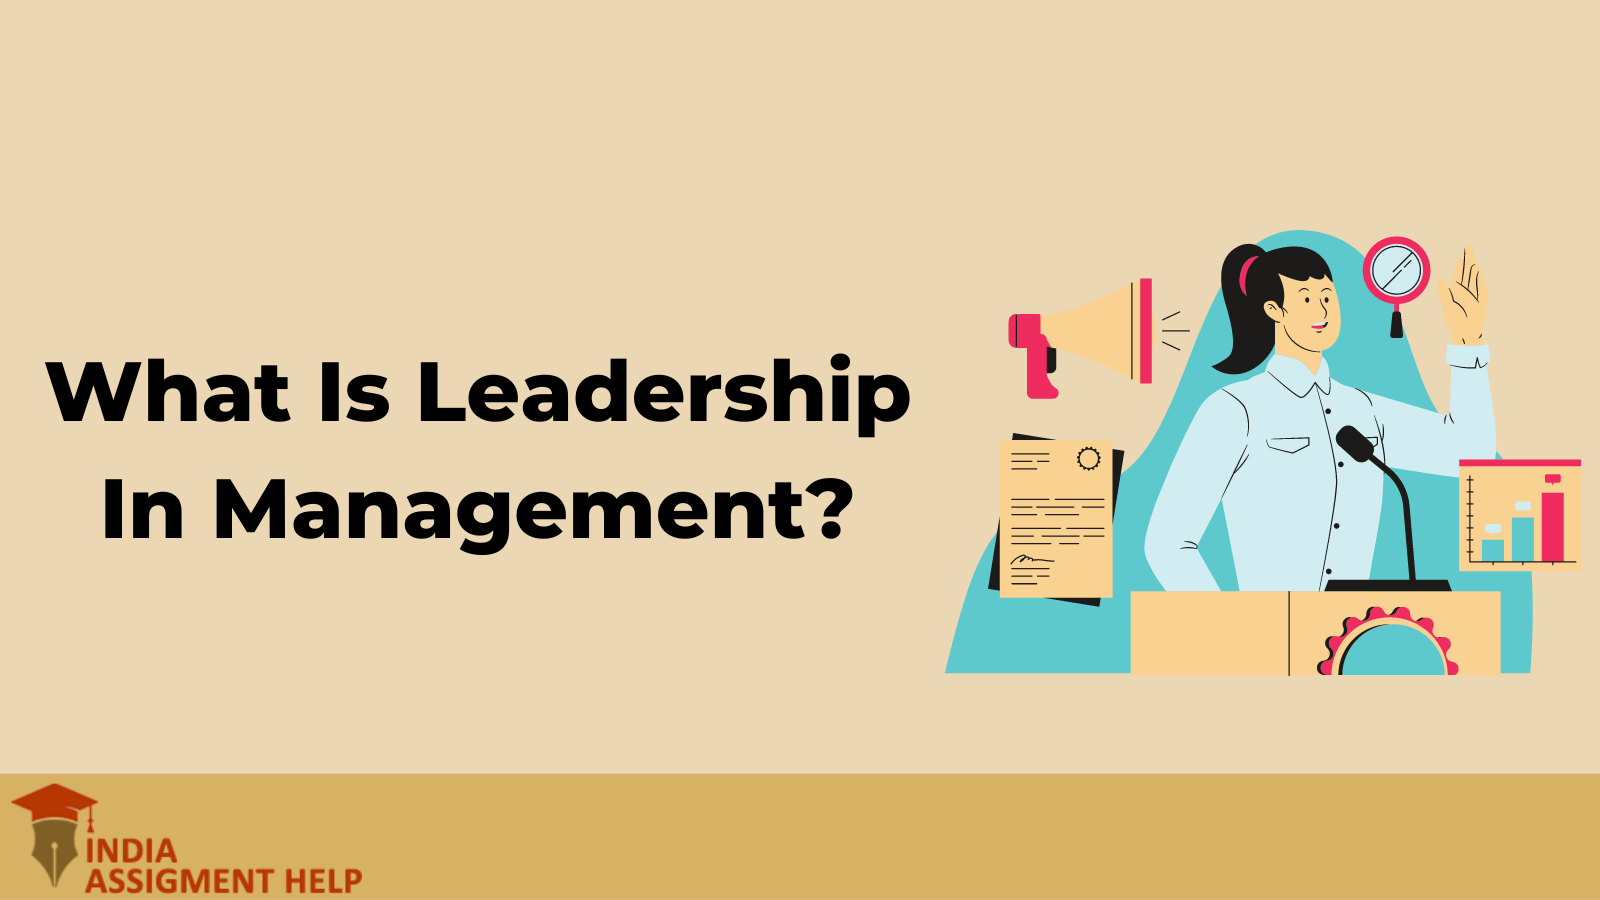 What Is Leadership In Management?